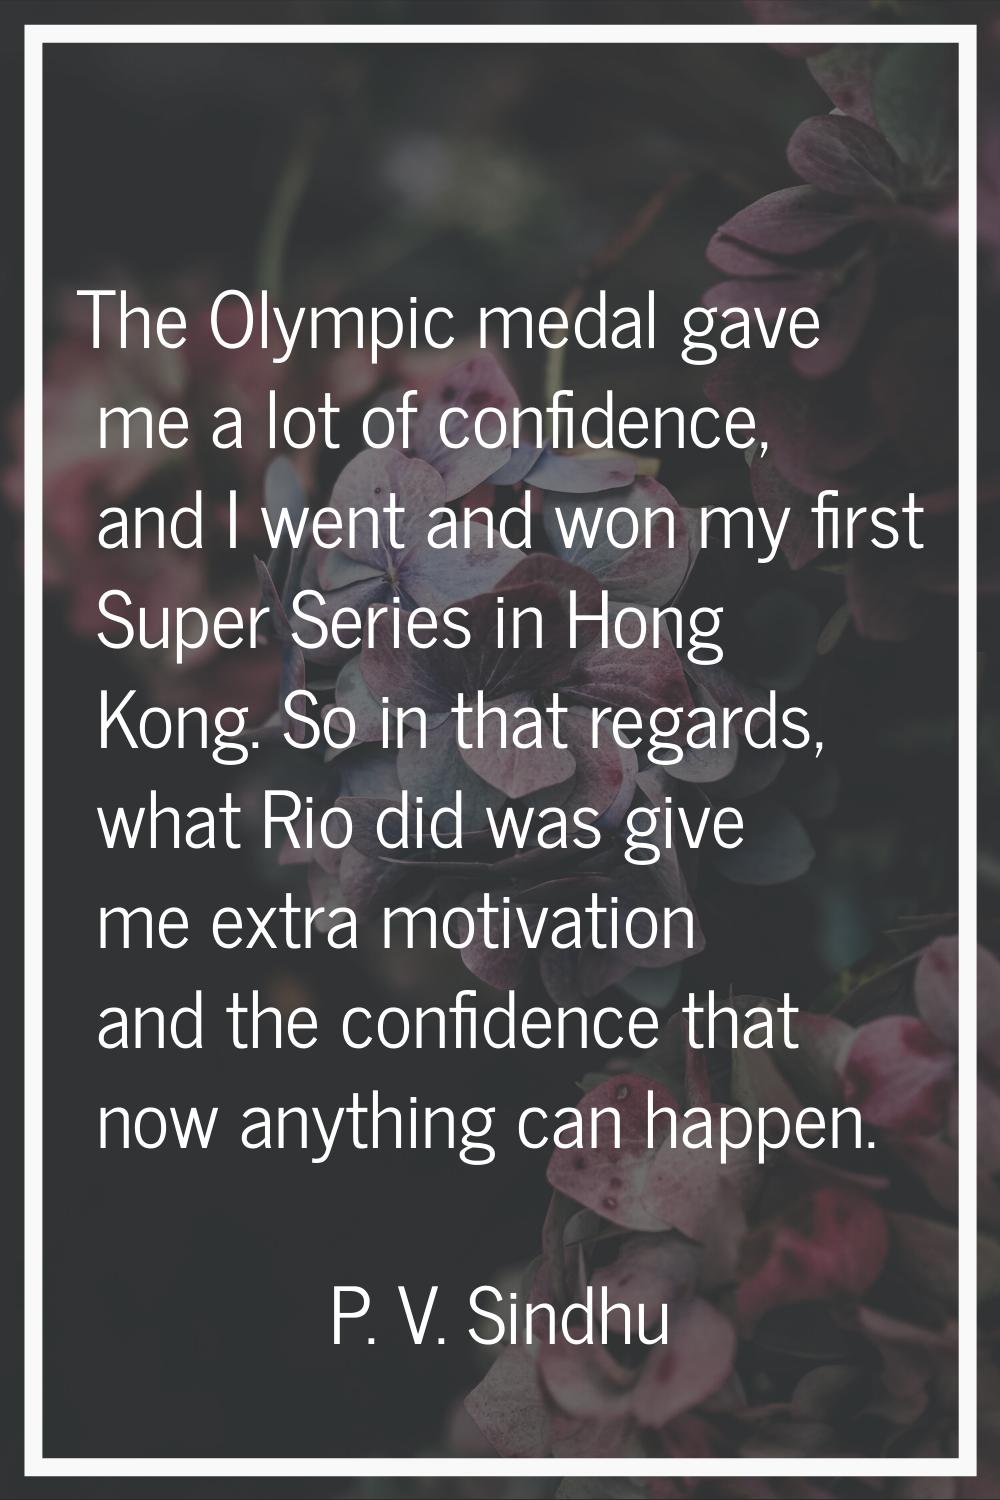 The Olympic medal gave me a lot of confidence, and I went and won my first Super Series in Hong Kon